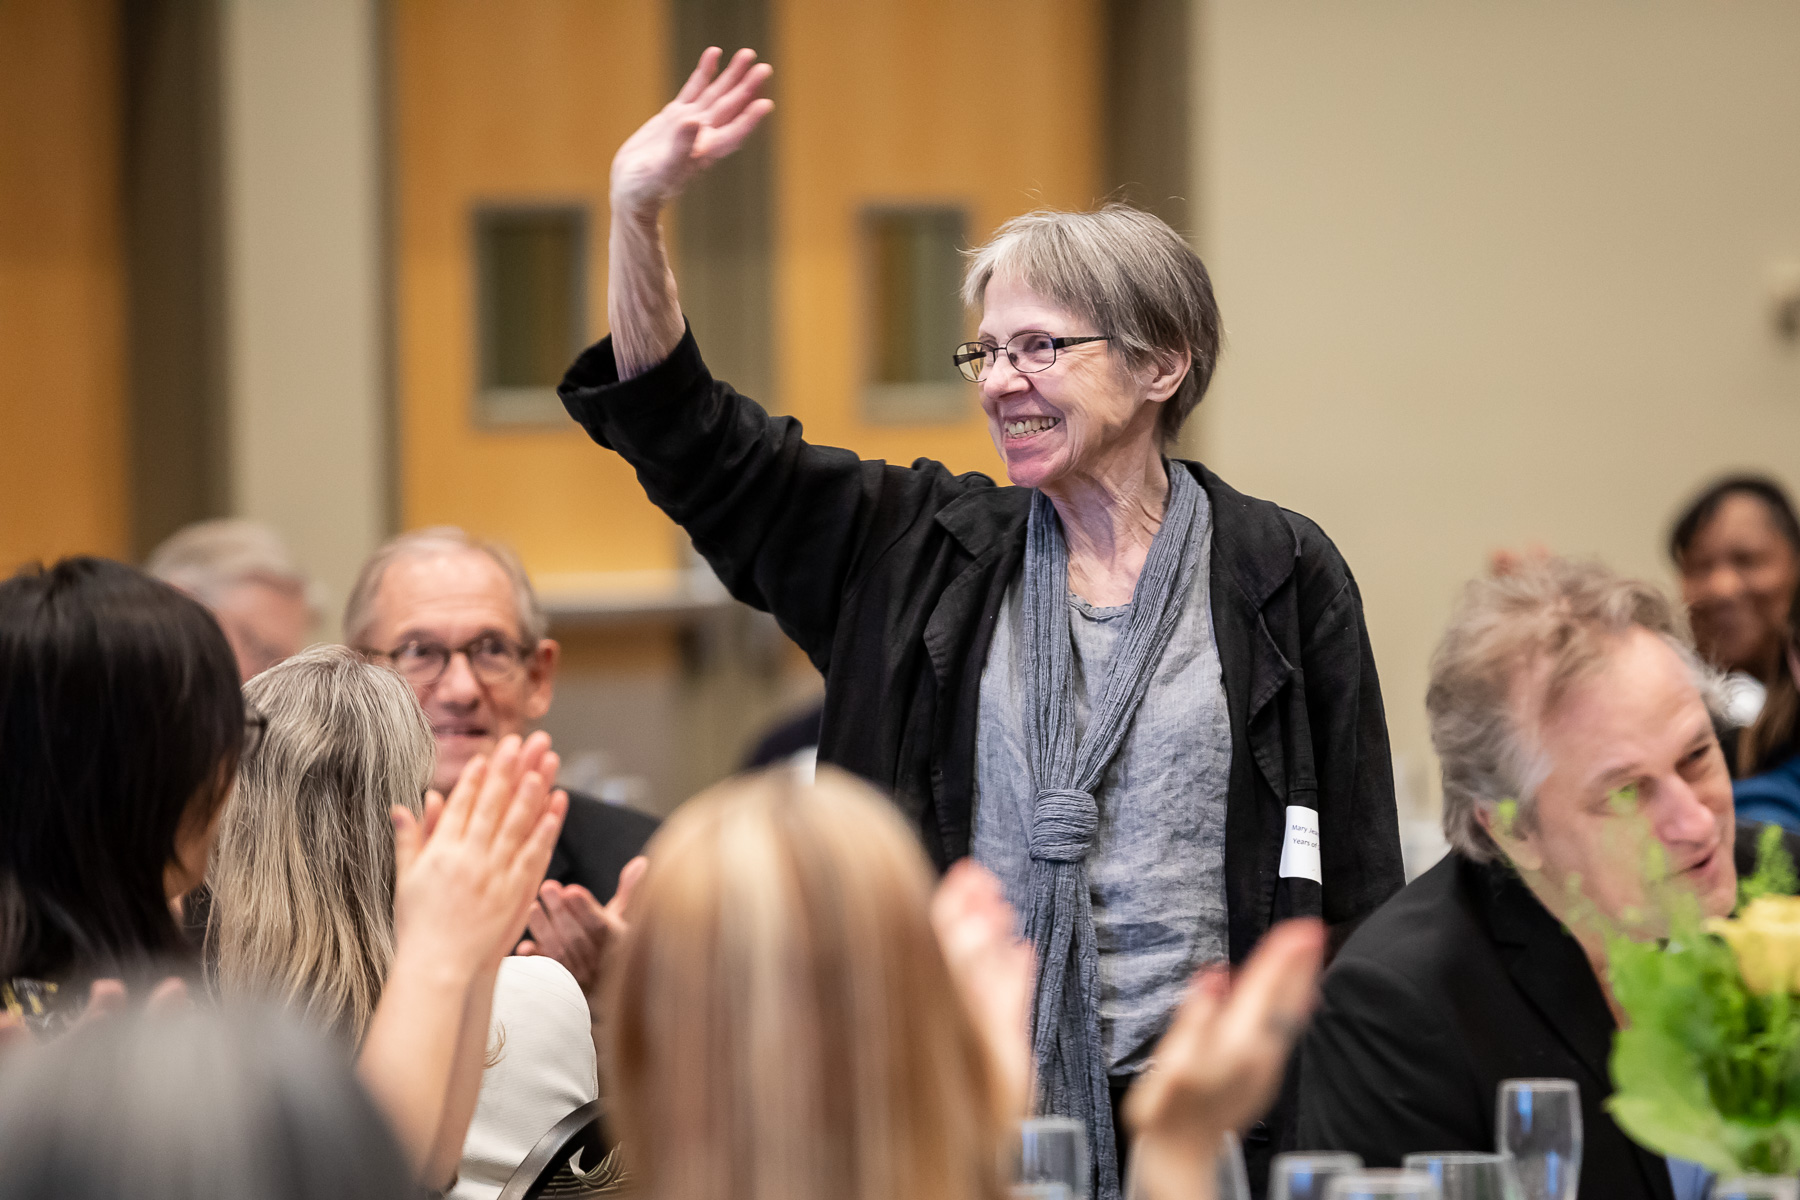 Mary Jeanne Larrabee, professor of Philosophy, Peace, Justice and Conflict Studies, celebrates 45 years at DePaul University.